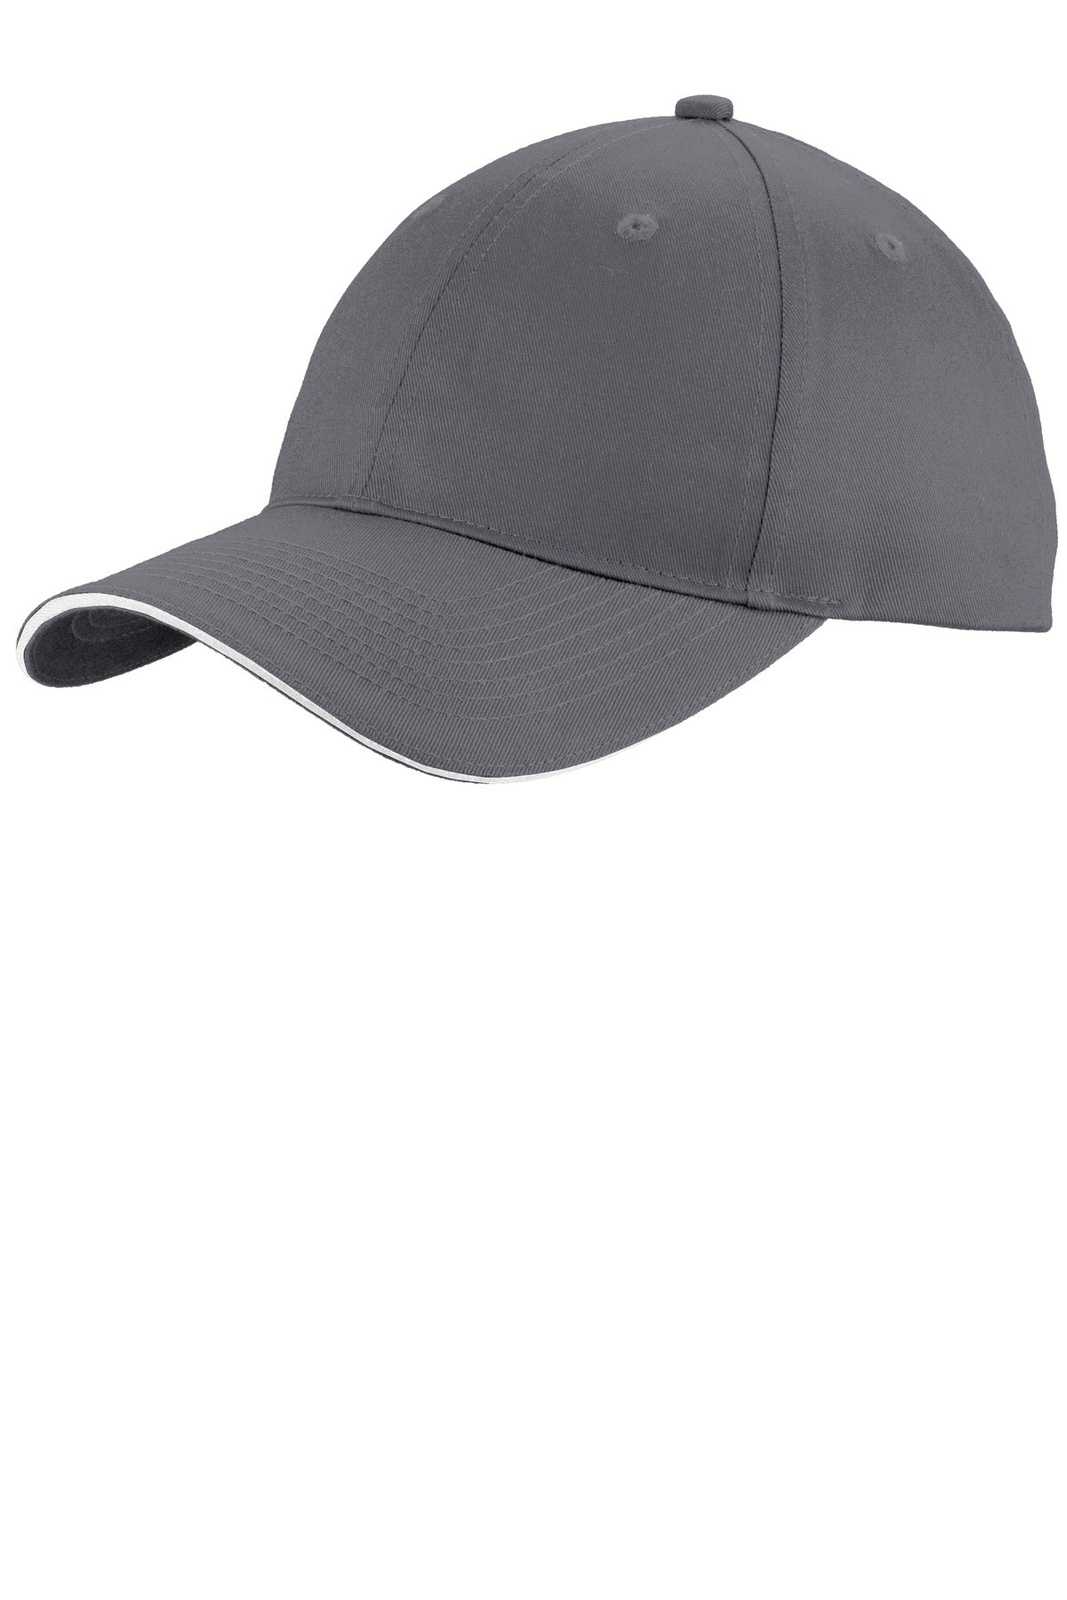 Port & Company C919 Unstructured Sandwich Bill Cap - Charcoal White - HIT a Double - 1